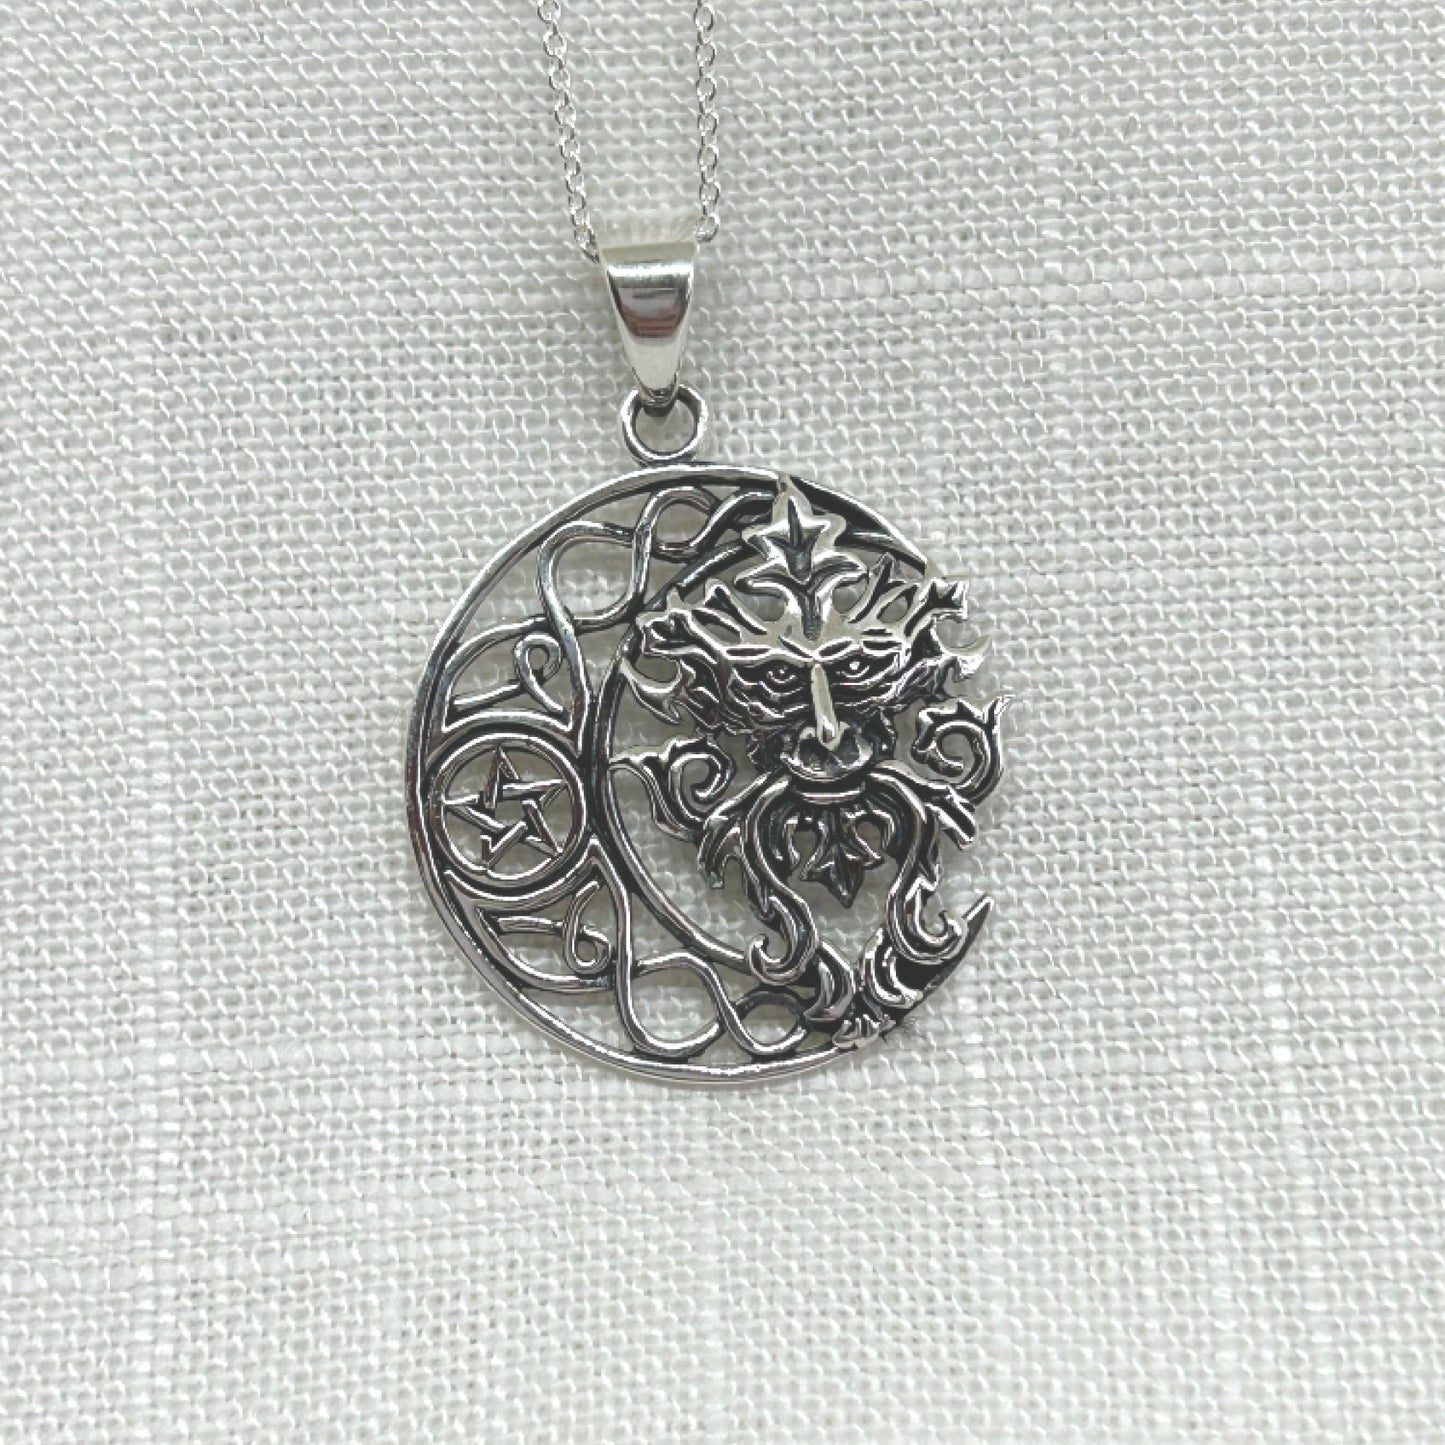 This 925 silver pendant features a Celtic knot style crescent moon with a pentacle within its centre. Filling the space in the moon is a gorgeous Green Man, the mysterious Pagan God who is a protector of all wildlife, woodlands and nature that dates back to medieval times. He is also known by many other names such as Jack o' the Green, Cernunnos, John Barleycorn and Herne of the Hunt. The pendant is approximately 3.6cm long including the bale by 2.6cm wide. Total weight is 7g.